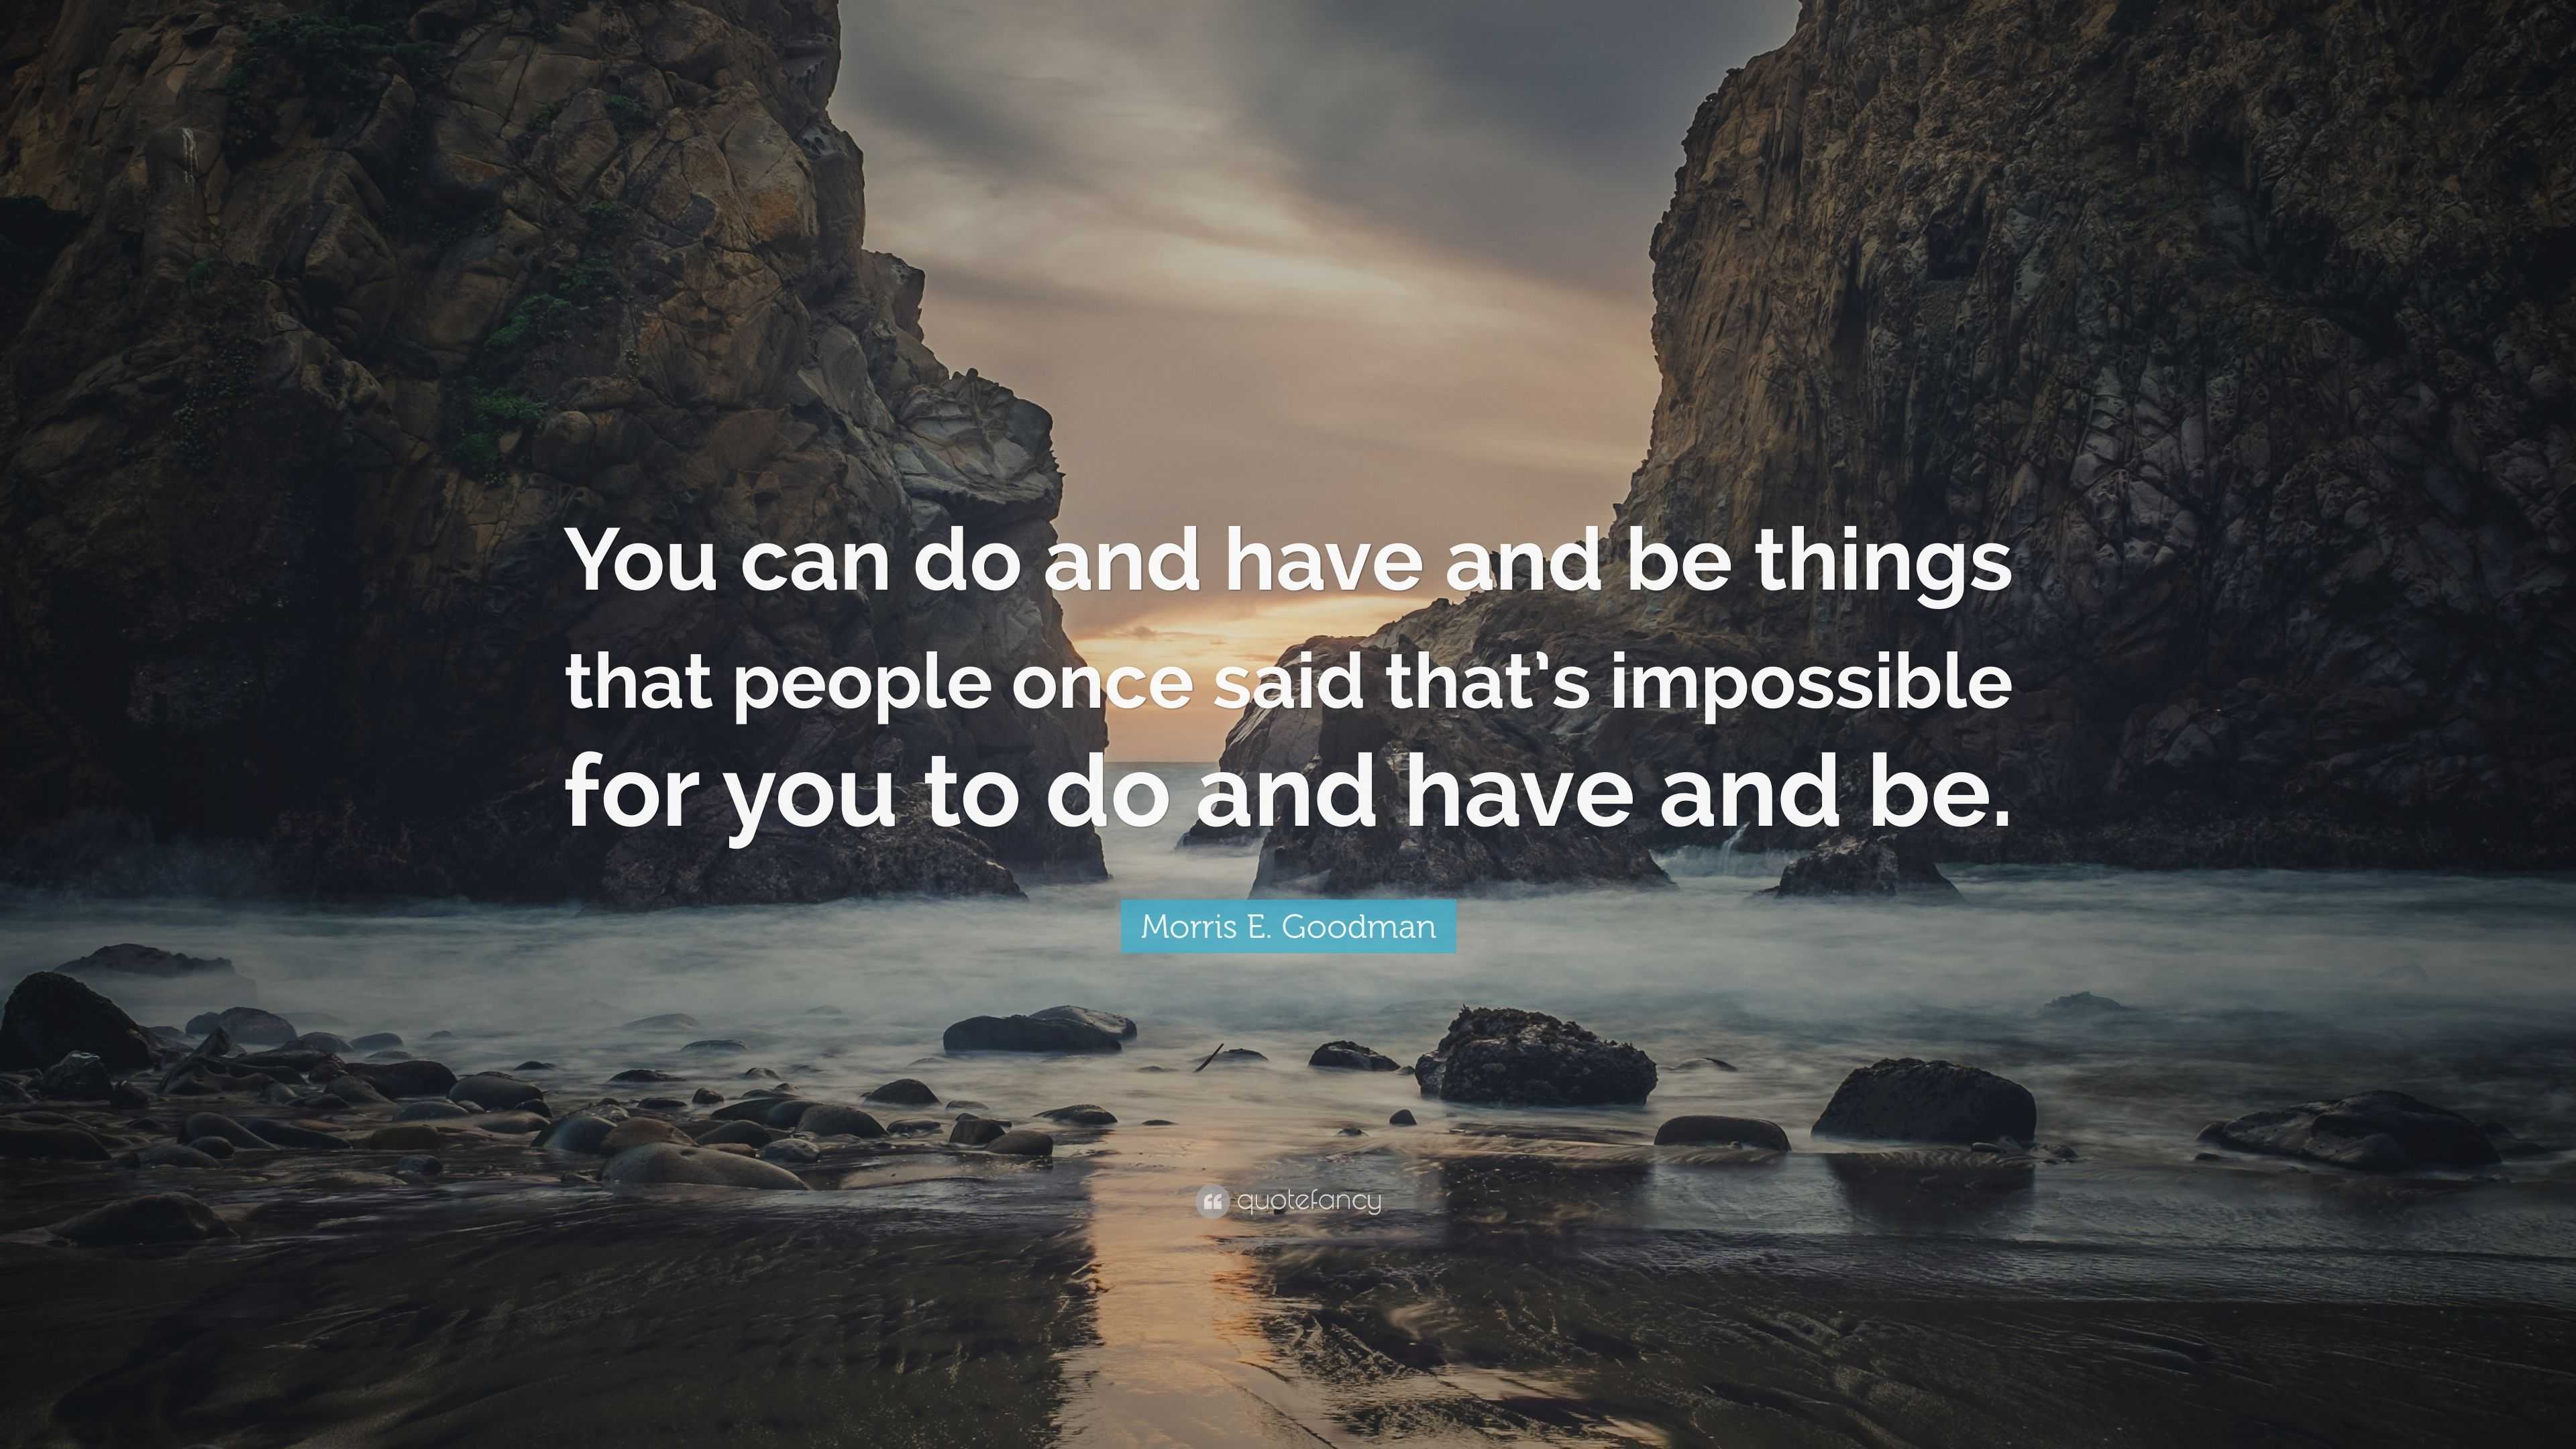 Morris E. Goodman Quote: “You can do and have and be things that people ...